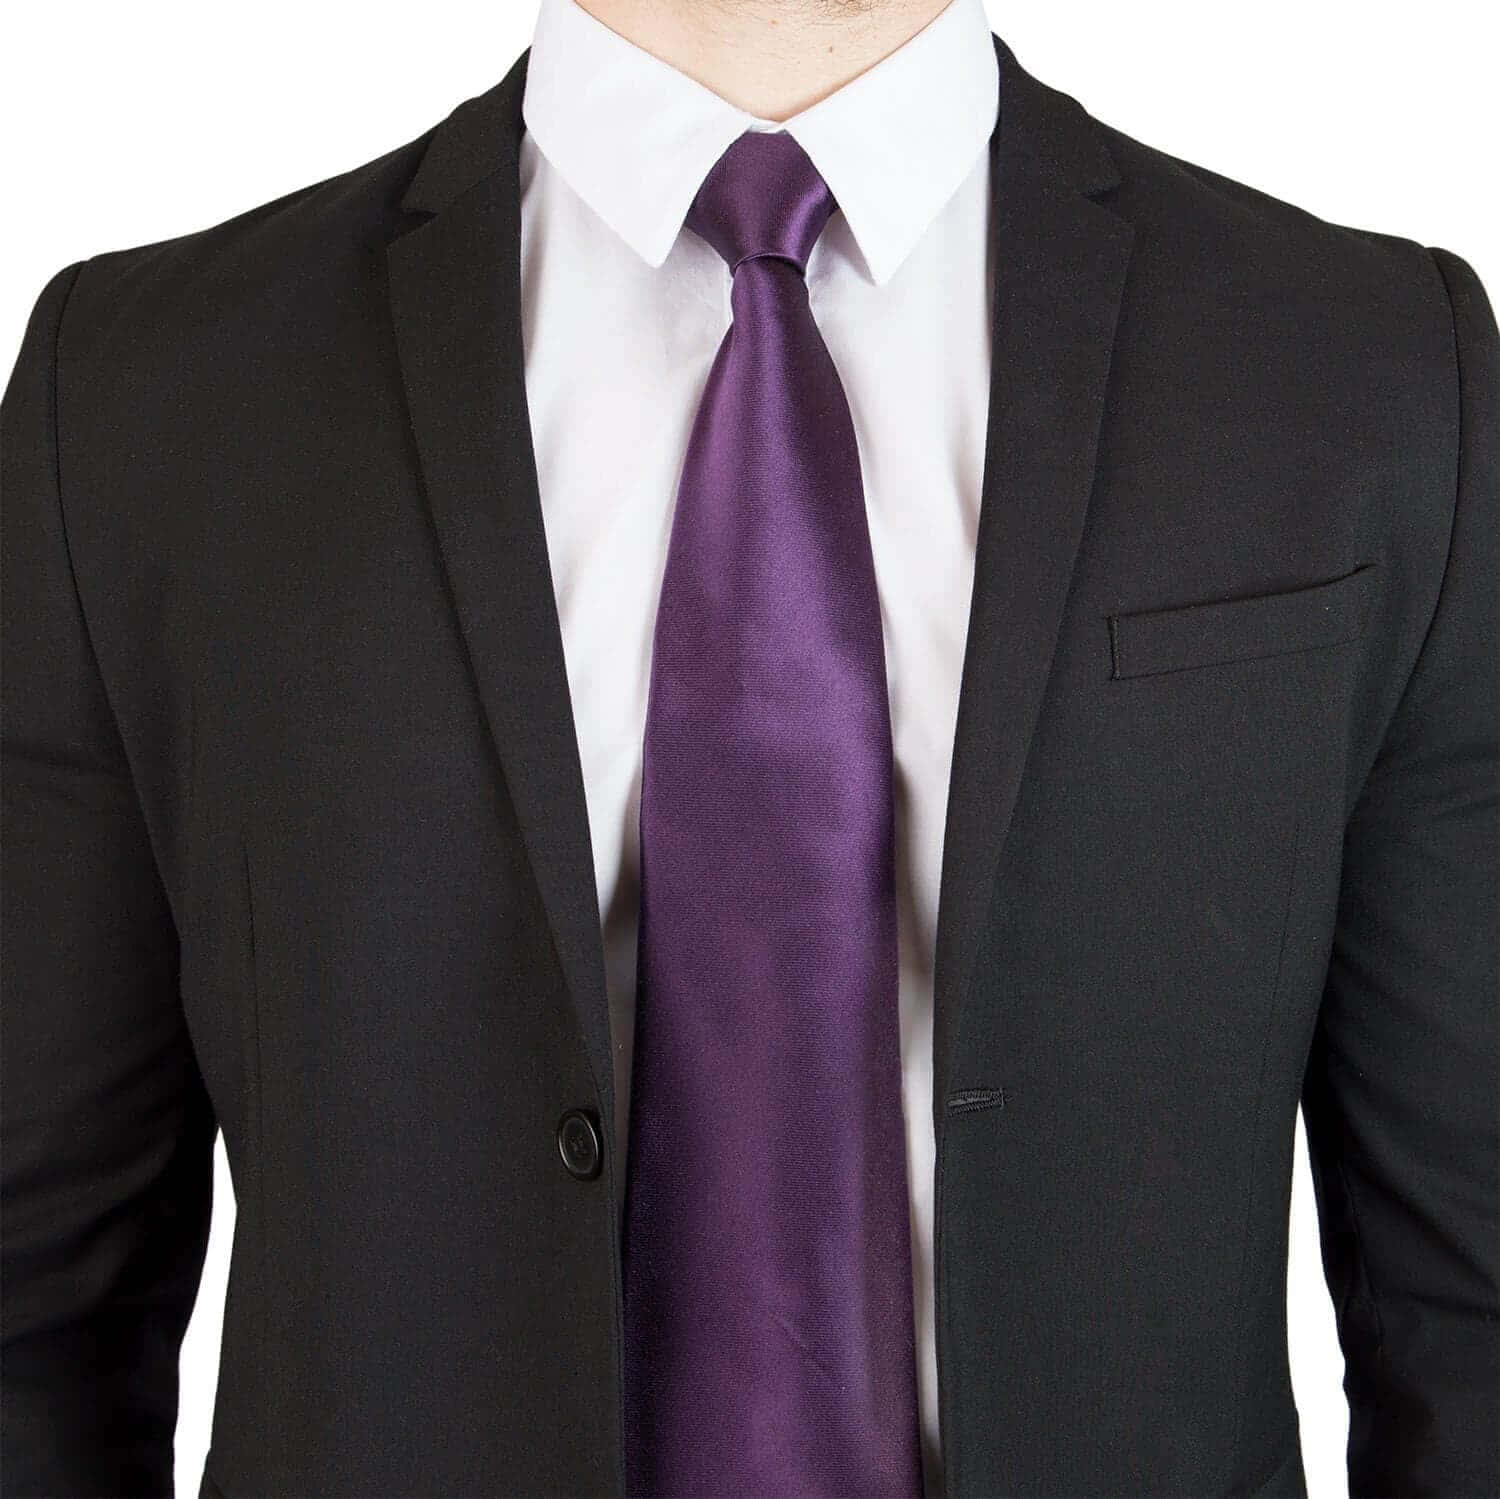 Enhance your professional look with a classic Purple Tie. Wallpaper